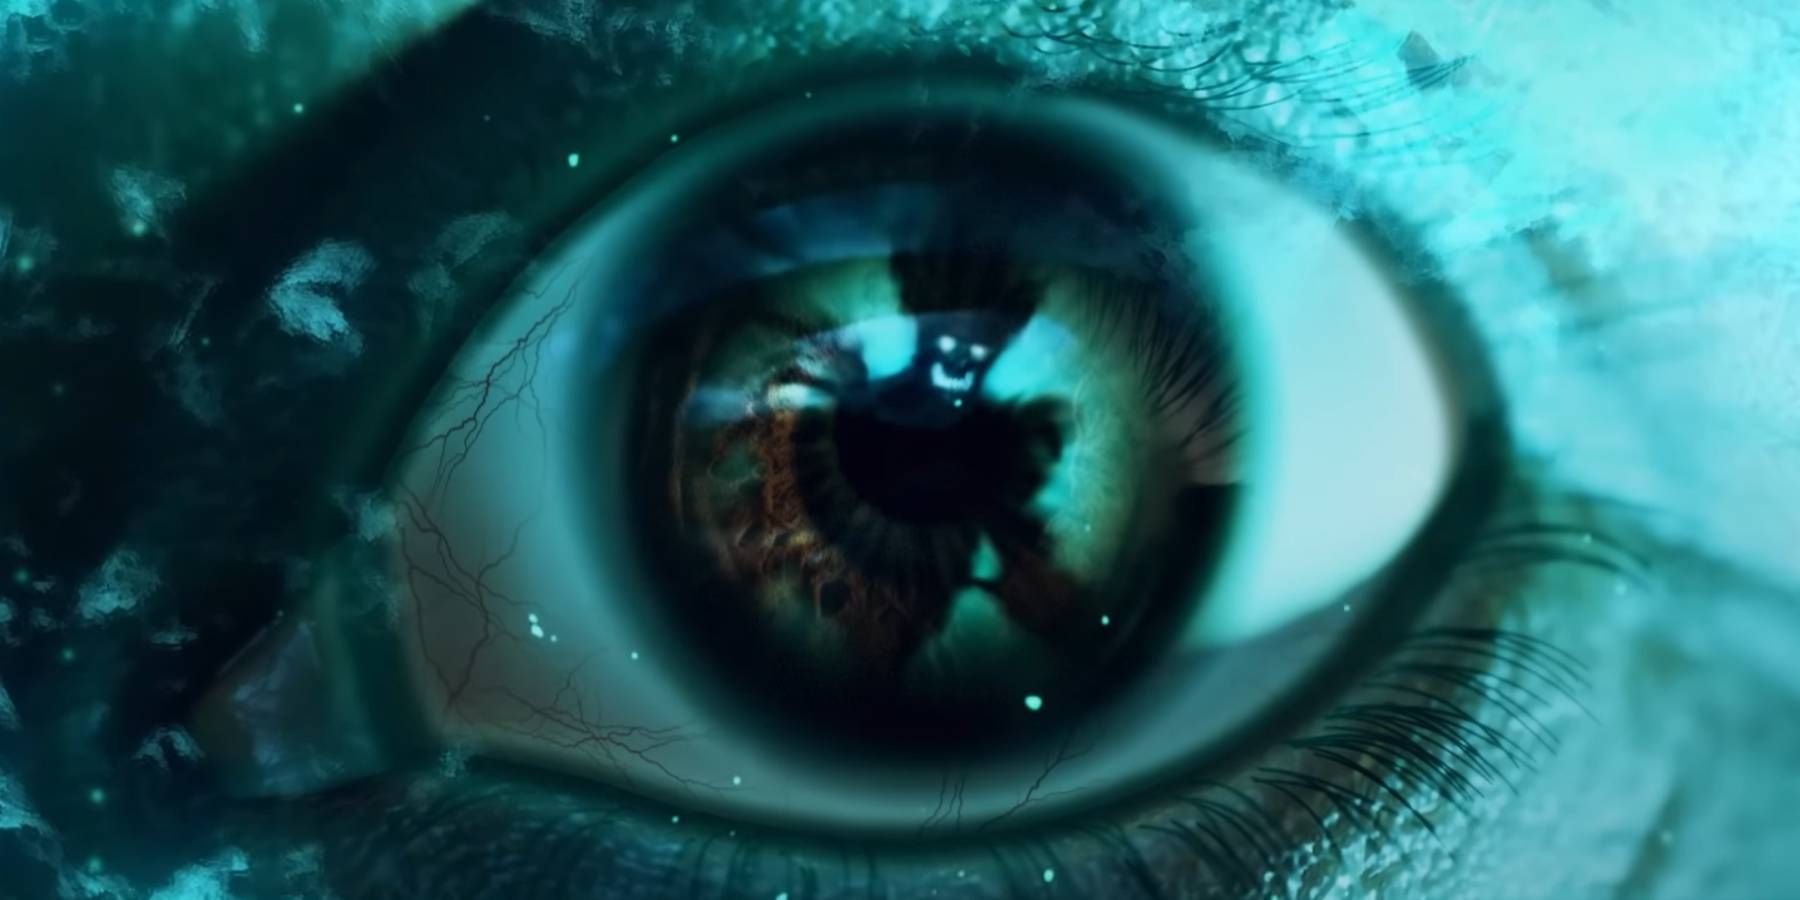 The reflection of a Haunt in Dwight's eye from Dead by Daylight's Haunted by Daylight trailer